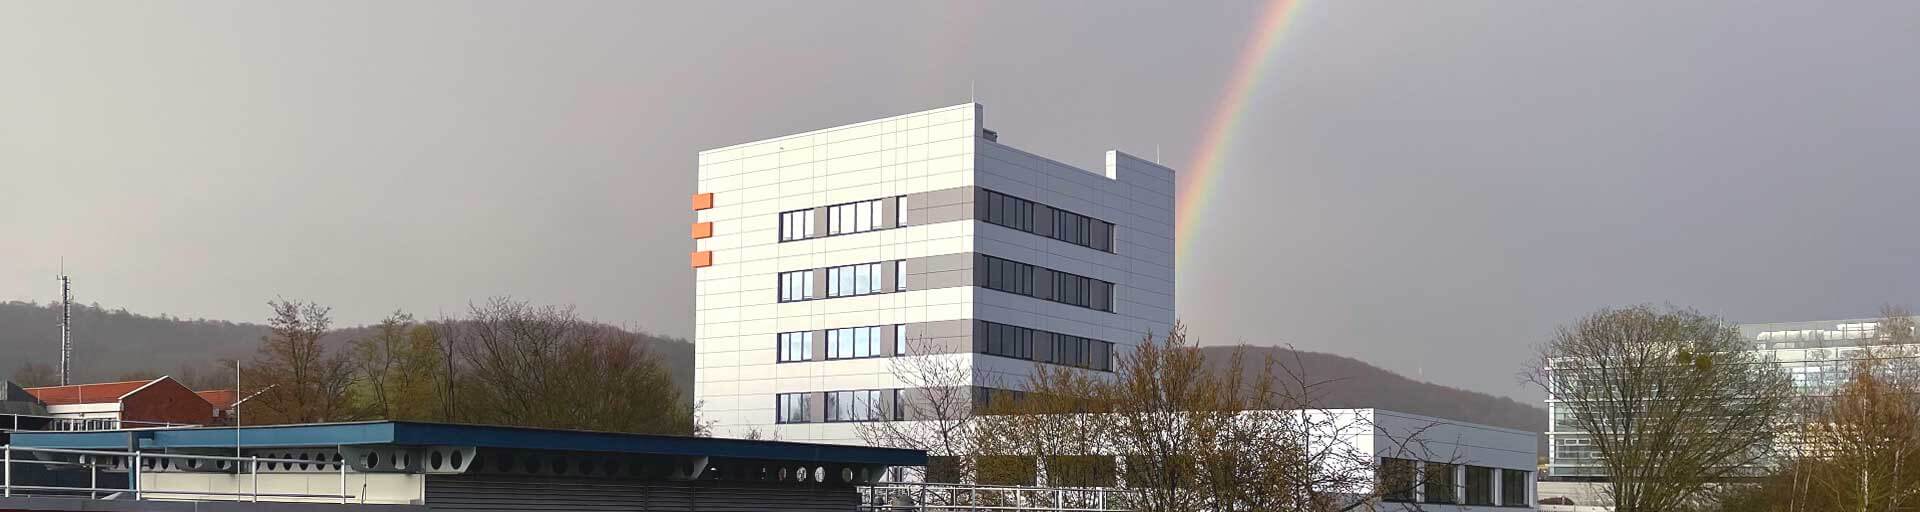 abberior's new headquarter with a rainbow in Göttingen, Germany